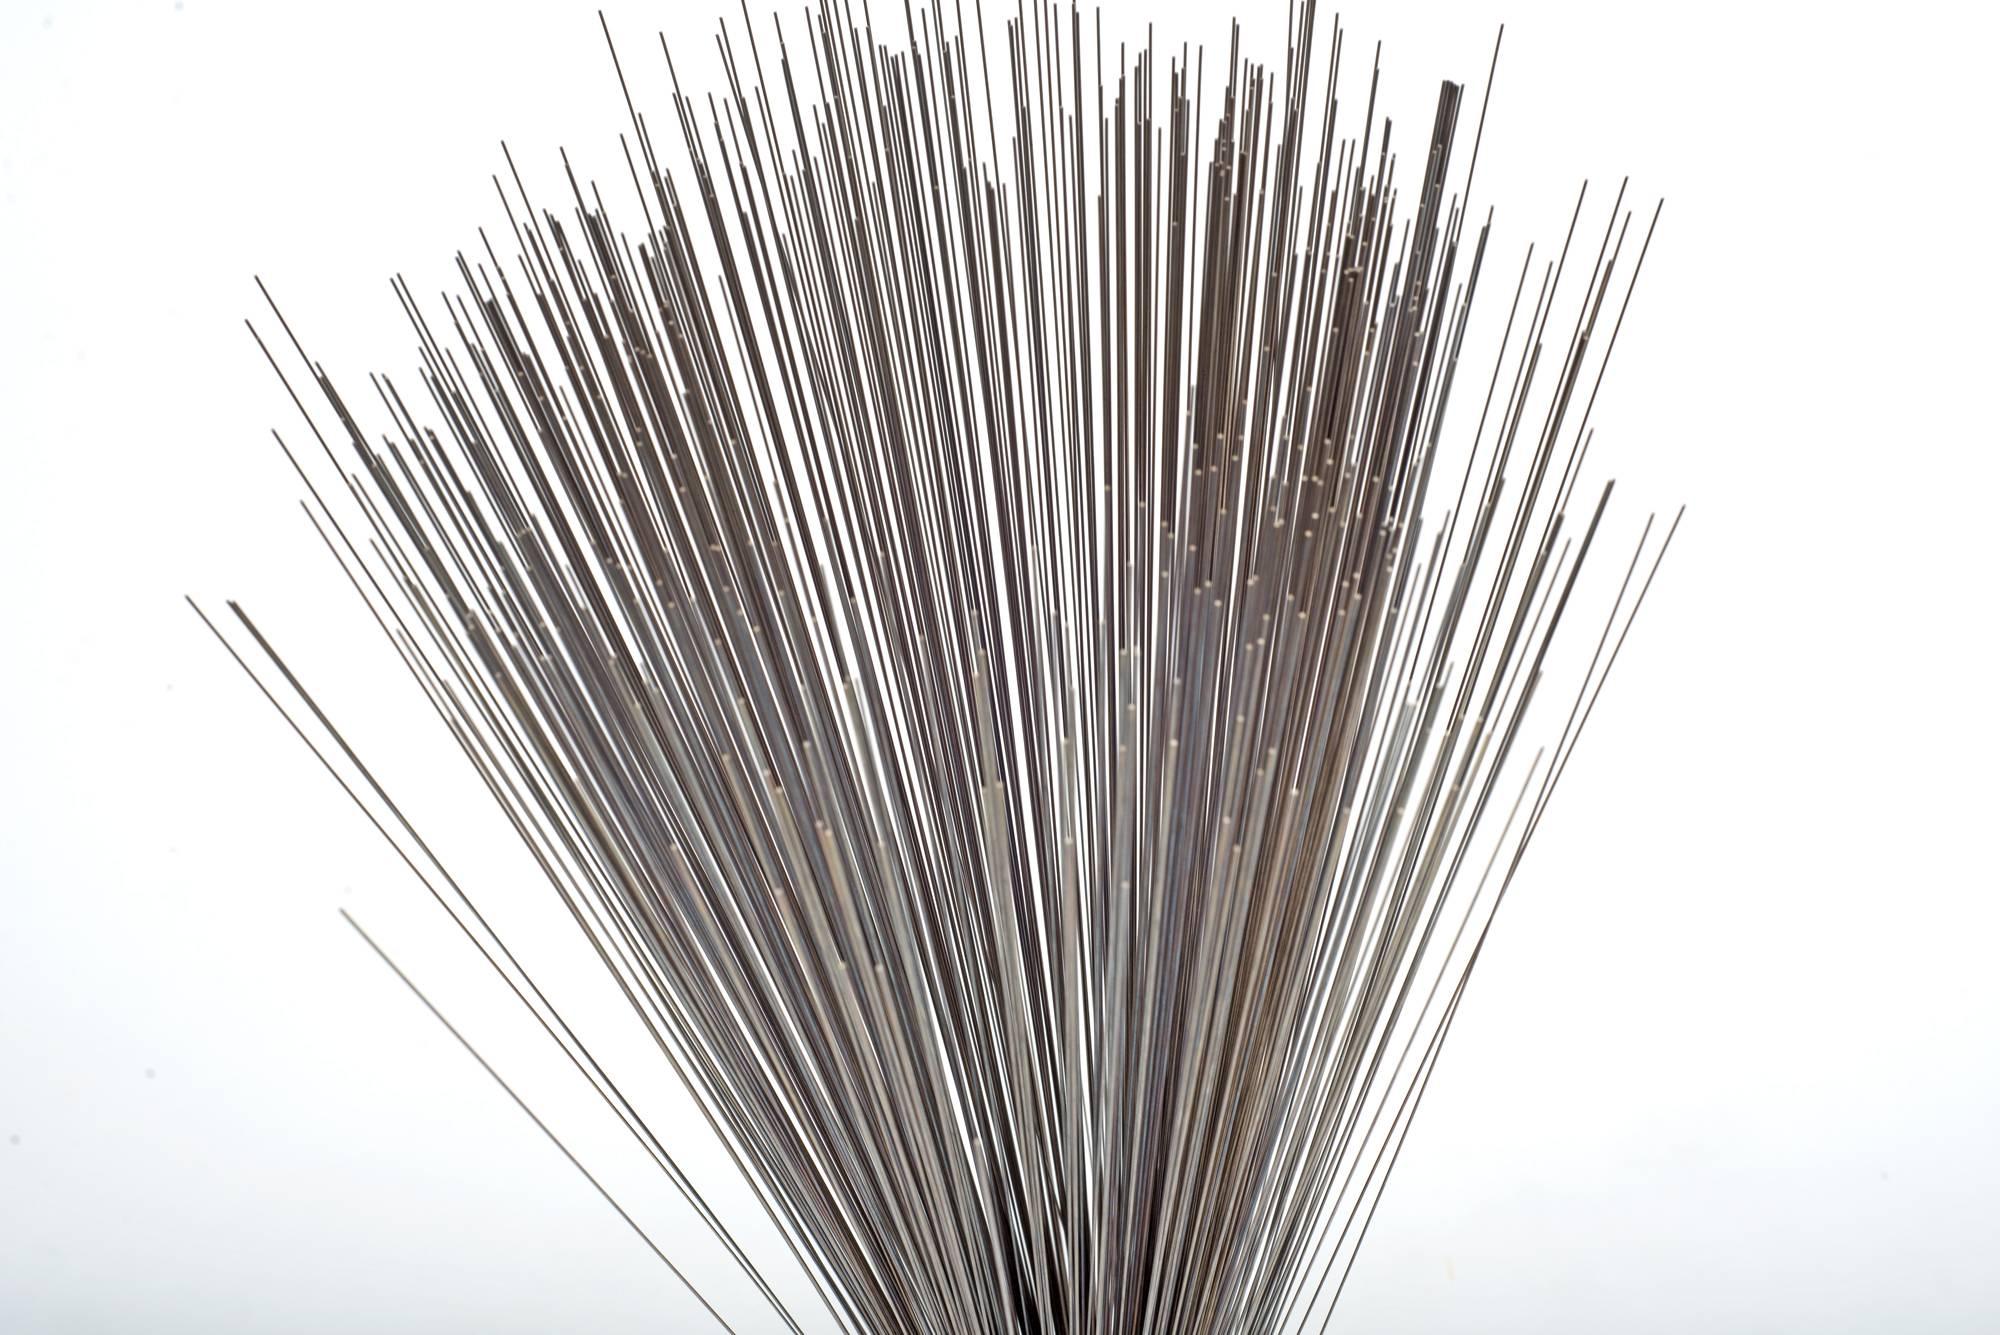 Early example of the iconic spray sculpture by Harry Bertoia. A bundle of stainless steel wires are gathered and inserted into a heavy base. The loose ends are left to drape gracefully, creating the namesake 